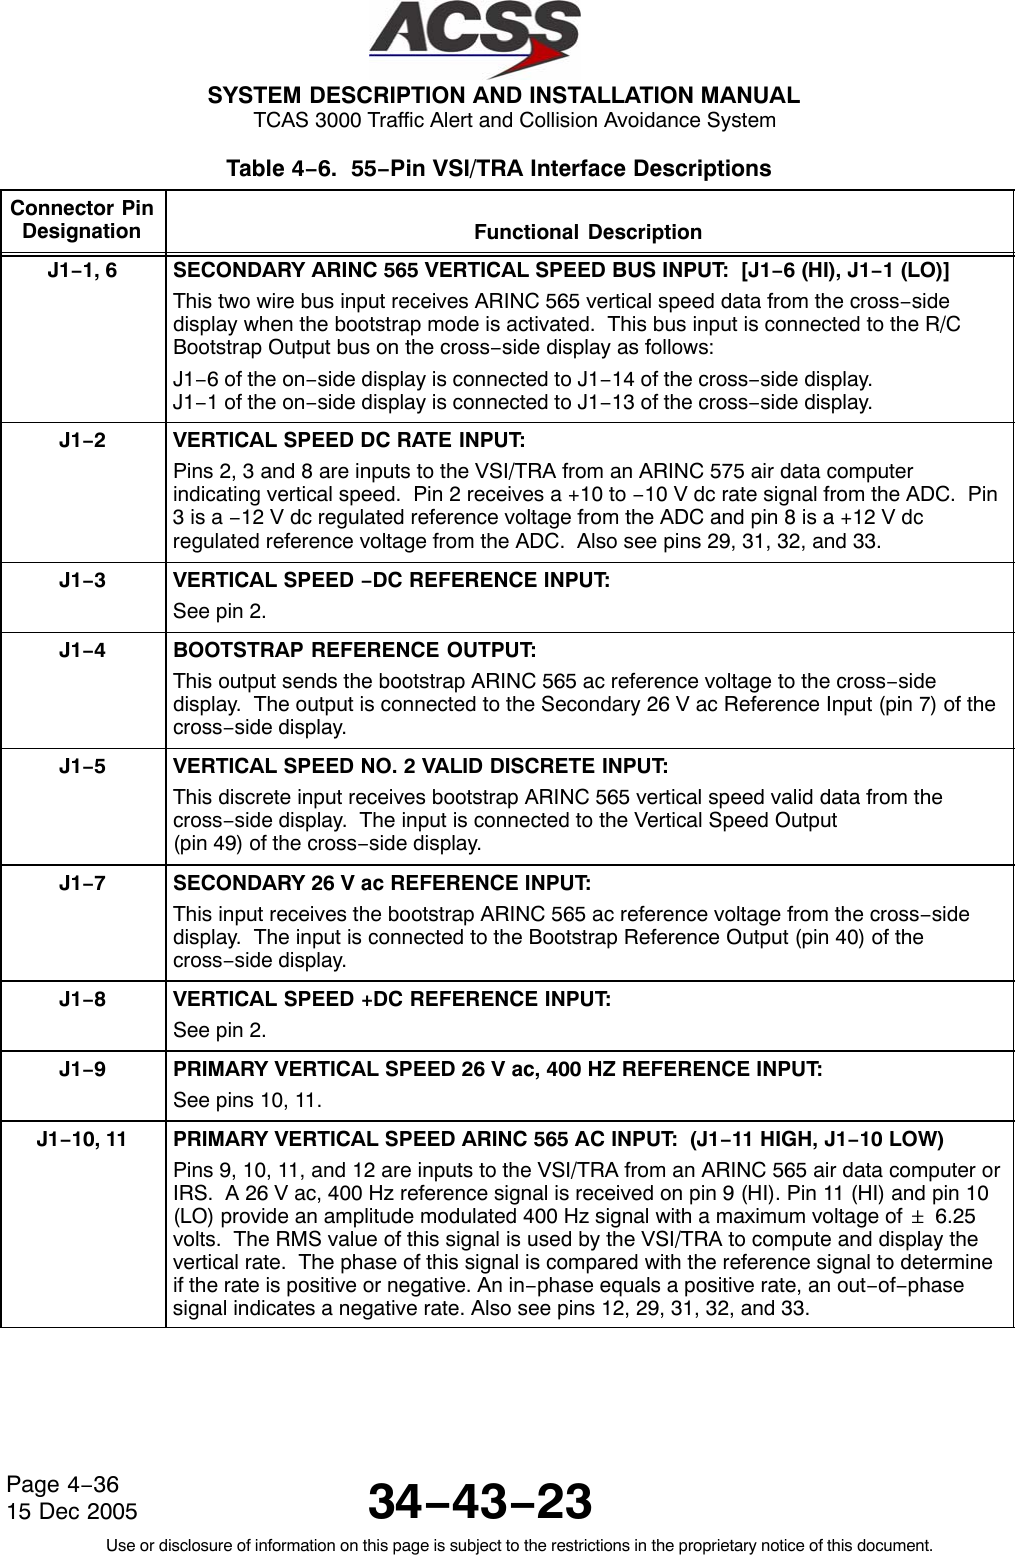  SYSTEM DESCRIPTION AND INSTALLATION MANUAL TCAS 3000 Traffic Alert and Collision Avoidance System34−43−23Use or disclosure of information on this page is subject to the restrictions in the proprietary notice of this document.Page 4−3615 Dec 2005Table 4−6.  55−Pin VSI/TRA Interface Descriptions  Connector PinDesignation Functional DescriptionJ1−1, 6 SECONDARY ARINC 565 VERTICAL SPEED BUS INPUT:  [J1−6 (HI), J1−1 (LO)]This two wire bus input receives ARINC 565 vertical speed data from the cross−sidedisplay when the bootstrap mode is activated.  This bus input is connected to the R/CBootstrap Output bus on the cross−side display as follows:J1−6 of the on−side display is connected to J1−14 of the cross−side display.J1−1 of the on−side display is connected to J1−13 of the cross−side display.J1−2VERTICAL SPEED DC RATE INPUT:Pins 2, 3 and 8 are inputs to the VSI/TRA from an ARINC 575 air data computerindicating vertical speed.  Pin 2 receives a +10 to −10 V dc rate signal from the ADC.  Pin3 is a −12 V dc regulated reference voltage from the ADC and pin 8 is a +12 V dcregulated reference voltage from the ADC.  Also see pins 29, 31, 32, and 33.J1−3VERTICAL SPEED −DC REFERENCE INPUT:See pin 2.J1−4BOOTSTRAP REFERENCE OUTPUT:This output sends the bootstrap ARINC 565 ac reference voltage to the cross−sidedisplay.  The output is connected to the Secondary 26 V ac Reference Input (pin 7) of thecross−side display.J1−5VERTICAL SPEED NO. 2 VALID DISCRETE INPUT:This discrete input receives bootstrap ARINC 565 vertical speed valid data from thecross−side display.  The input is connected to the Vertical Speed Output (pin 49) of the cross−side display.J1−7SECONDARY 26 V ac REFERENCE INPUT:This input receives the bootstrap ARINC 565 ac reference voltage from the cross−sidedisplay.  The input is connected to the Bootstrap Reference Output (pin 40) of thecross−side display.J1−8VERTICAL SPEED +DC REFERENCE INPUT:See pin 2.J1−9PRIMARY VERTICAL SPEED 26 V ac, 400 HZ REFERENCE INPUT:See pins 10, 11.J1−10, 11 PRIMARY VERTICAL SPEED ARINC 565 AC INPUT:  (J1−11 HIGH, J1−10 LOW)Pins 9, 10, 11, and 12 are inputs to the VSI/TRA from an ARINC 565 air data computer orIRS.  A 26 V ac, 400 Hz reference signal is received on pin 9 (HI). Pin 11 (HI) and pin 10(LO) provide an amplitude modulated 400 Hz signal with a maximum voltage of &quot; 6.25volts.  The RMS value of this signal is used by the VSI/TRA to compute and display thevertical rate.  The phase of this signal is compared with the reference signal to determineif the rate is positive or negative. An in−phase equals a positive rate, an out−of−phasesignal indicates a negative rate. Also see pins 12, 29, 31, 32, and 33.